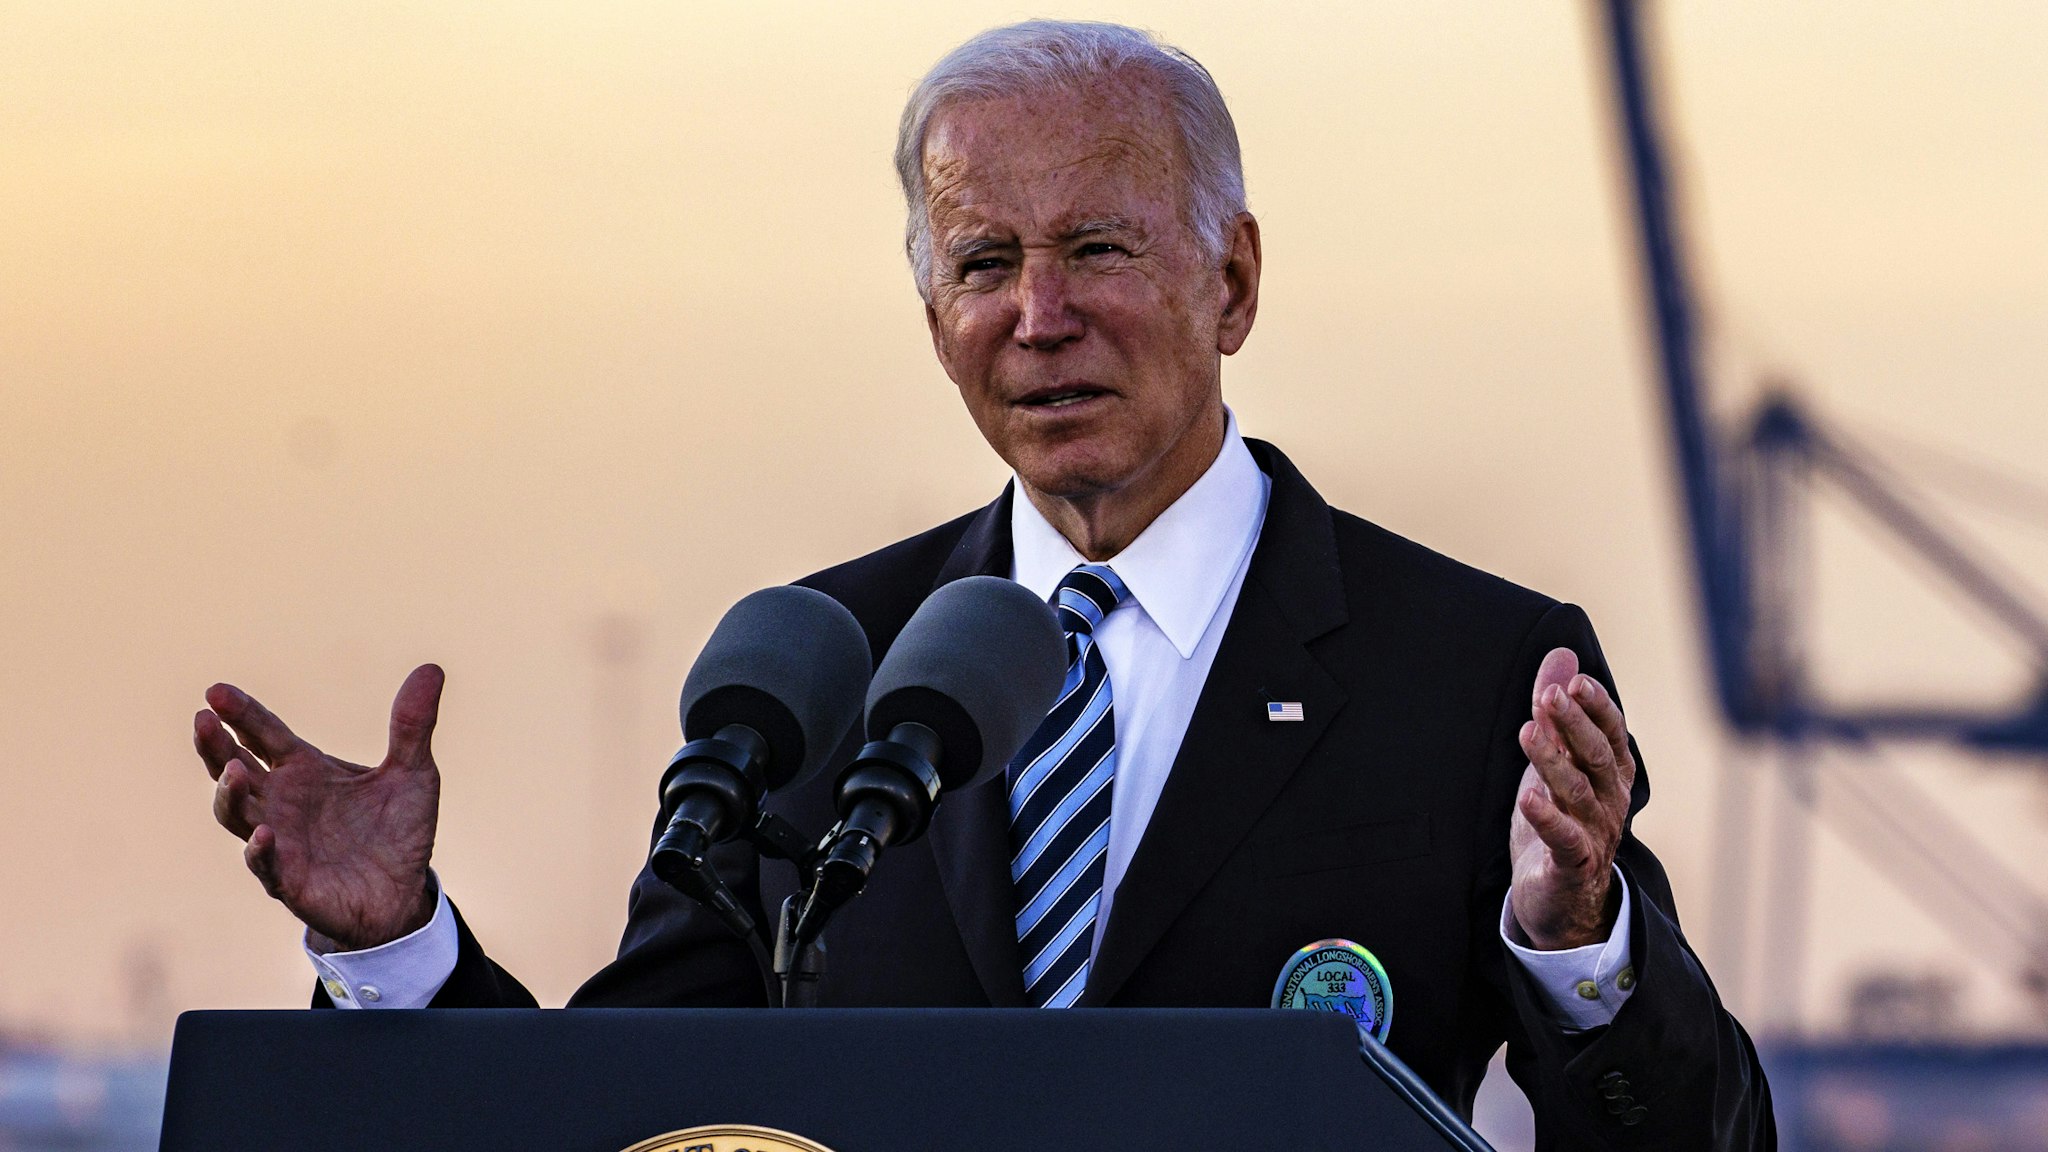 U.S. President Joe Biden speaks on the bipartisan infrastructure deal at the Port of Baltimore in Baltimore, Maryland, U.S., on Wednesday, Nov. 10, 2021. Biden is using the Baltimore port as a backdrop in his campaign to promote the $550 billion infrastructure legislation Congress cleared last week, $17 billion of which would go to ports.